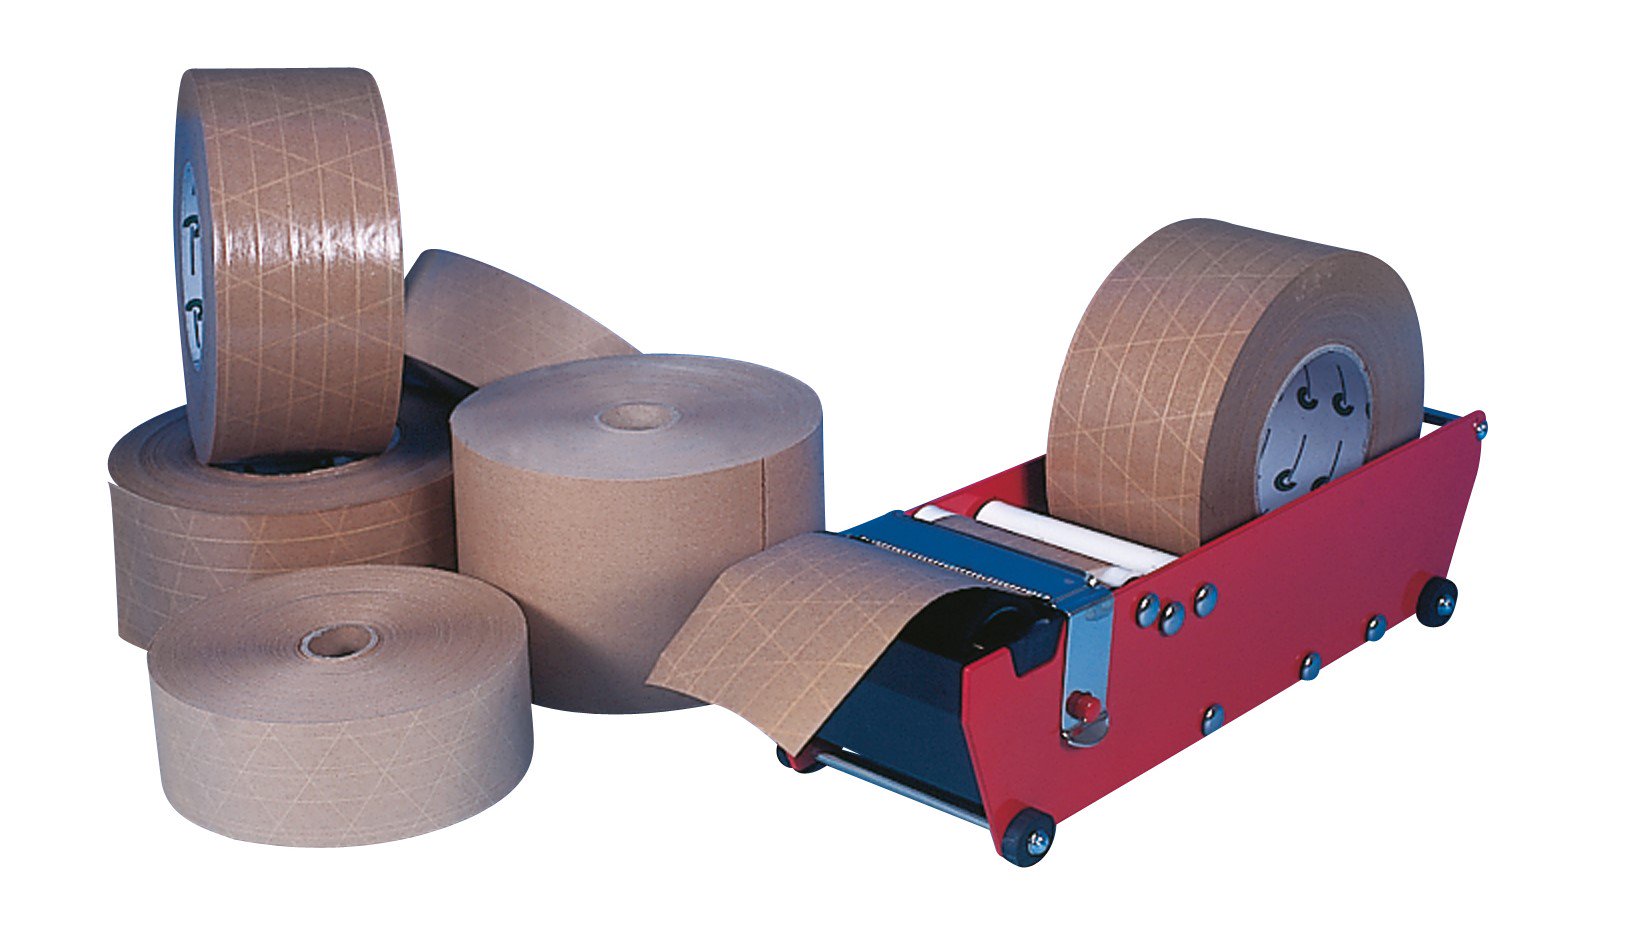 The Complete Guide to Gummed Paper Tape (updated 2020)